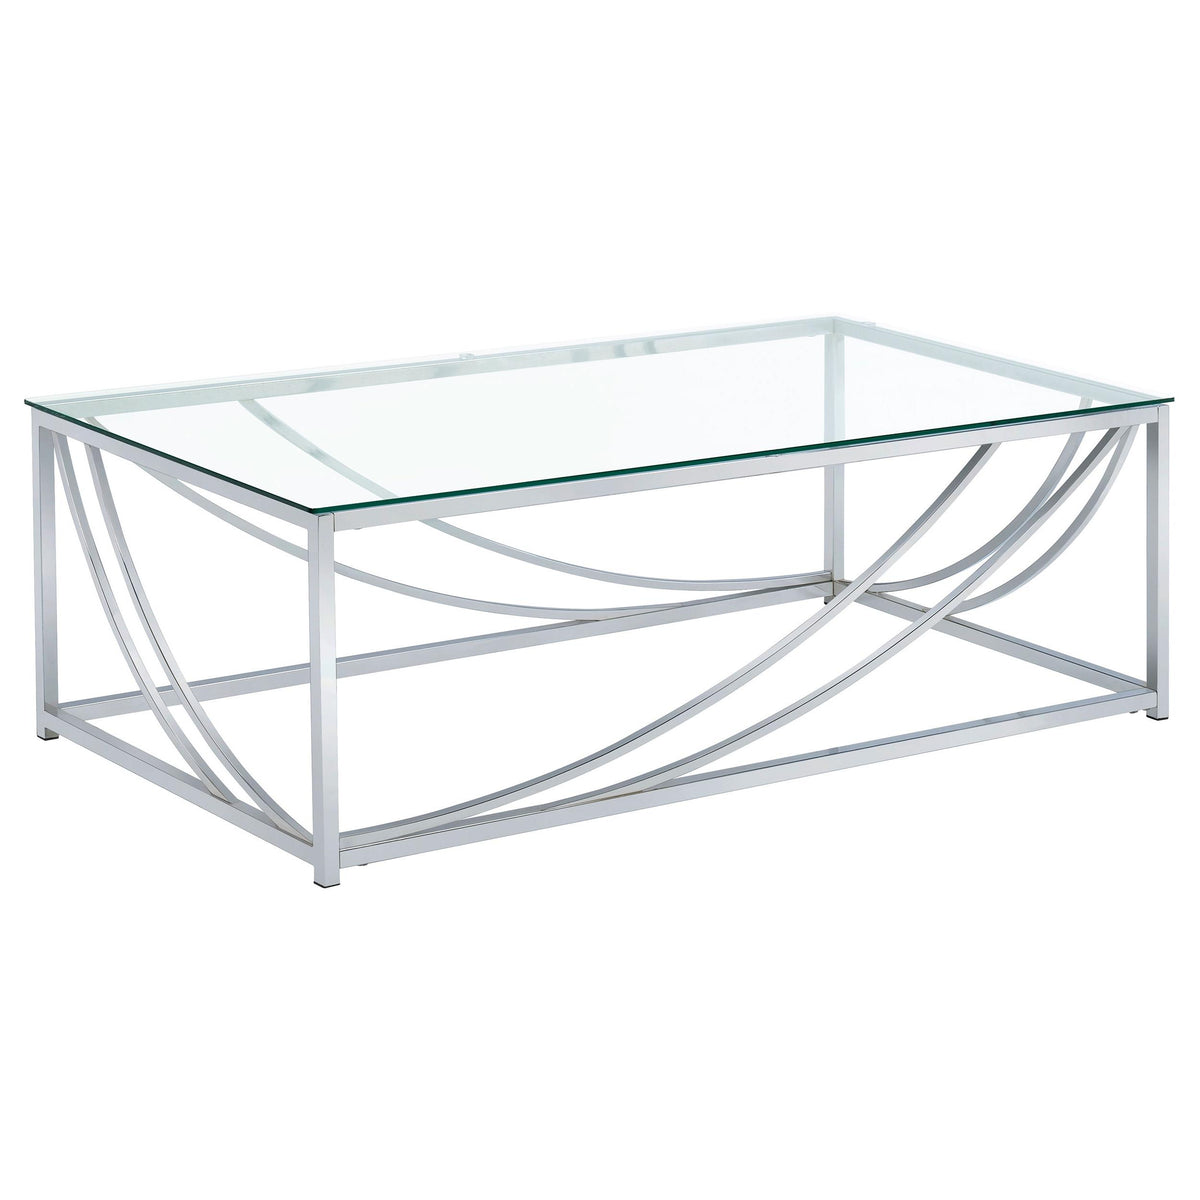 Lille Glass Top Rectangular Coffee Table Accents Chrome  Half Price Furniture